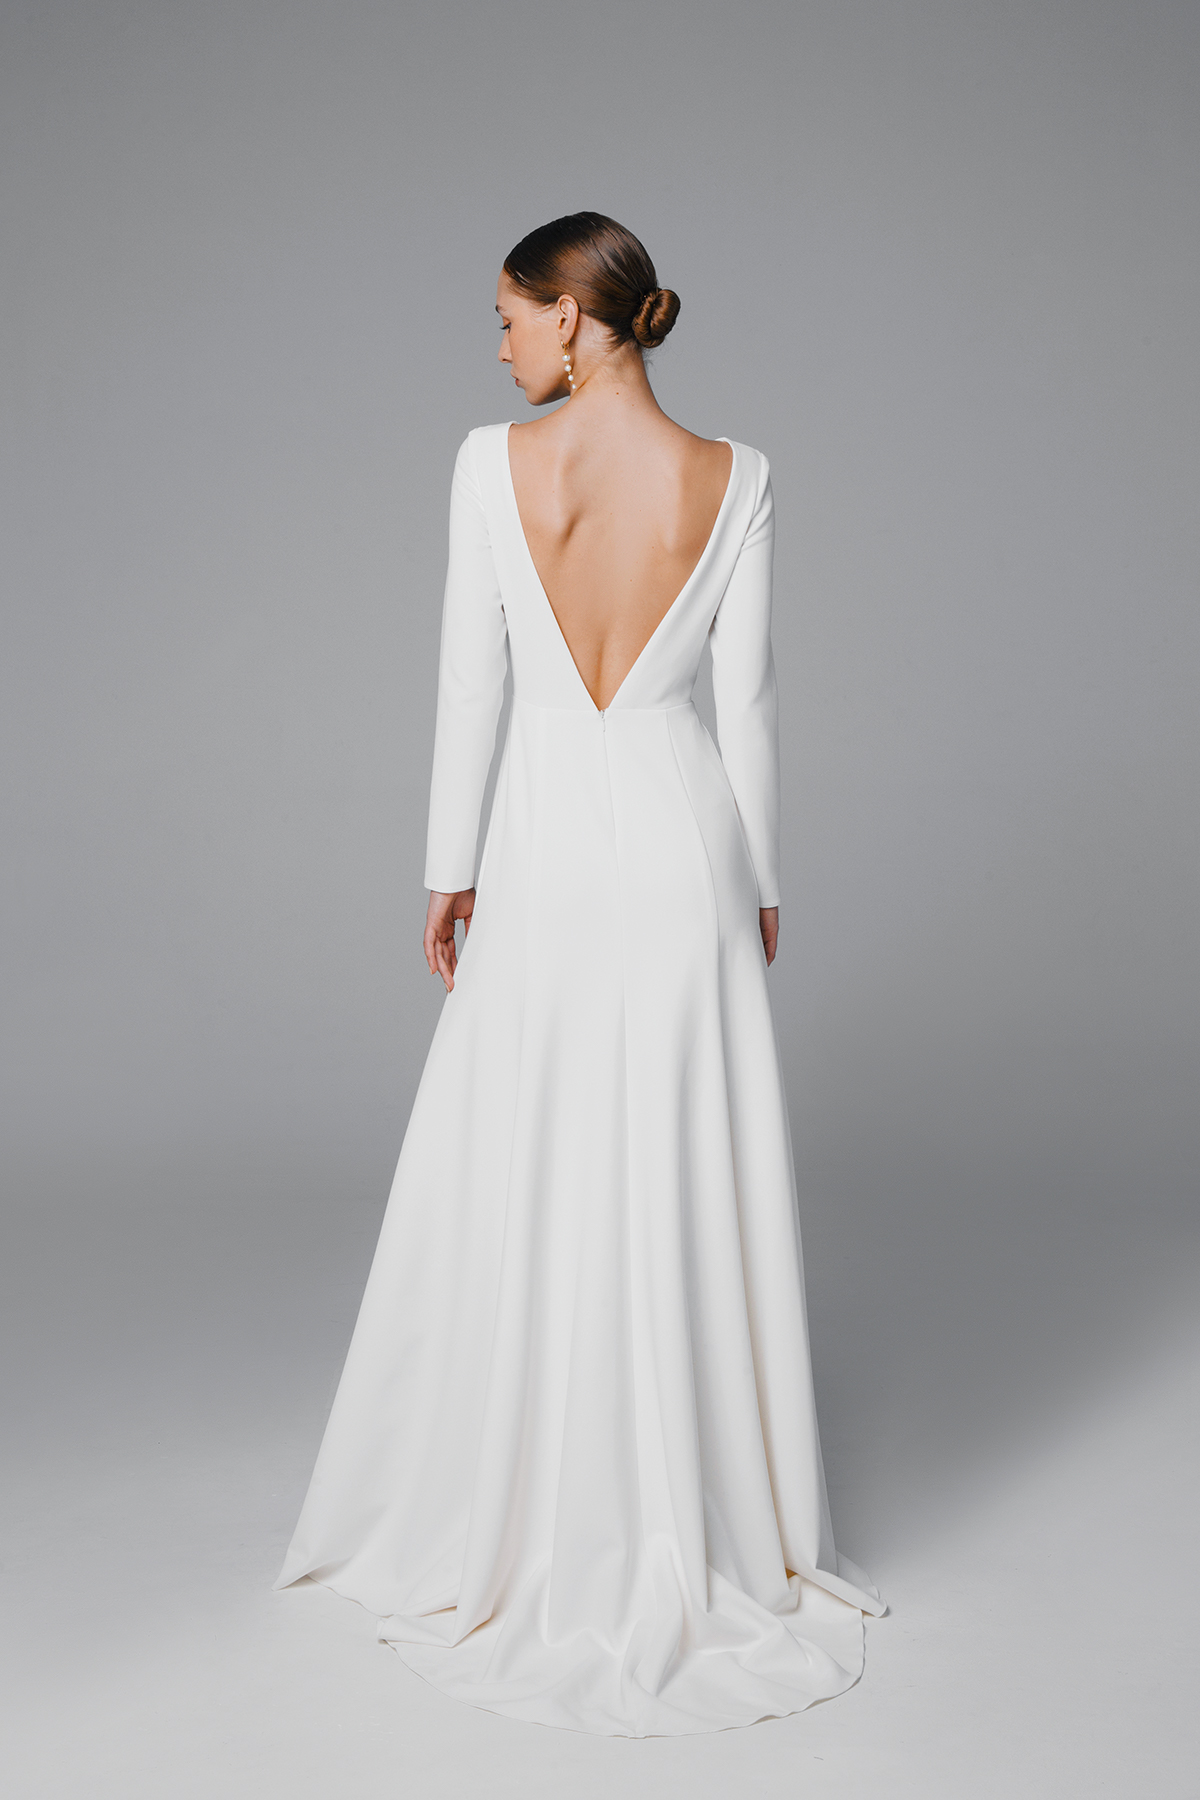 Fit and flare wedding dress with low back and long sleeves.